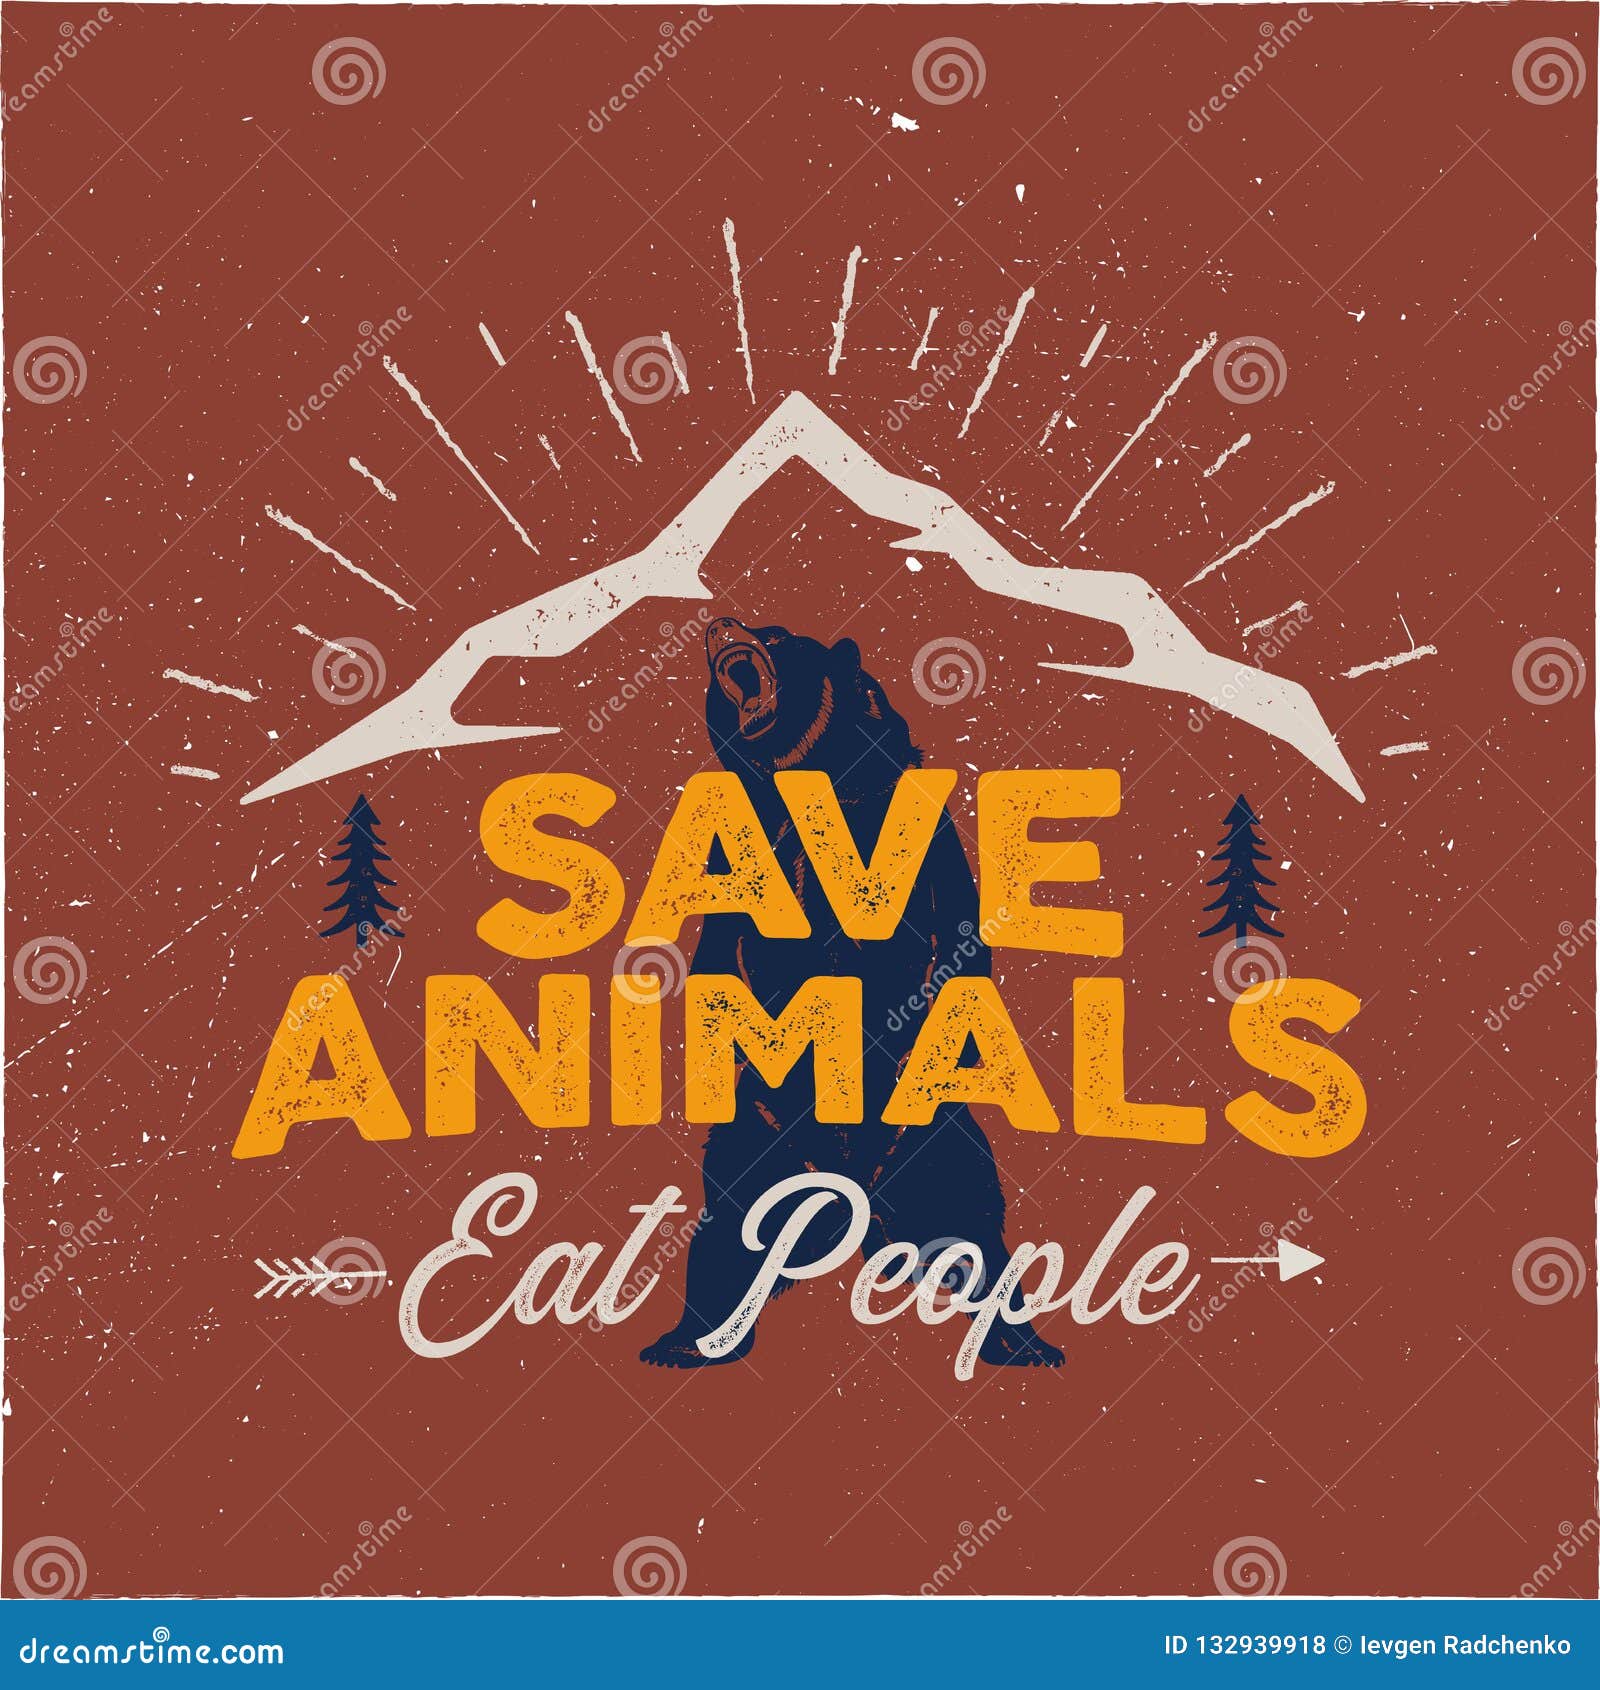 Camping Emblem Art. Wilderness Poster with Bear, Mountains, Trees. Save  Animals - Eat People Quote Stock Vector - Illustration of badge, logo:  132939918